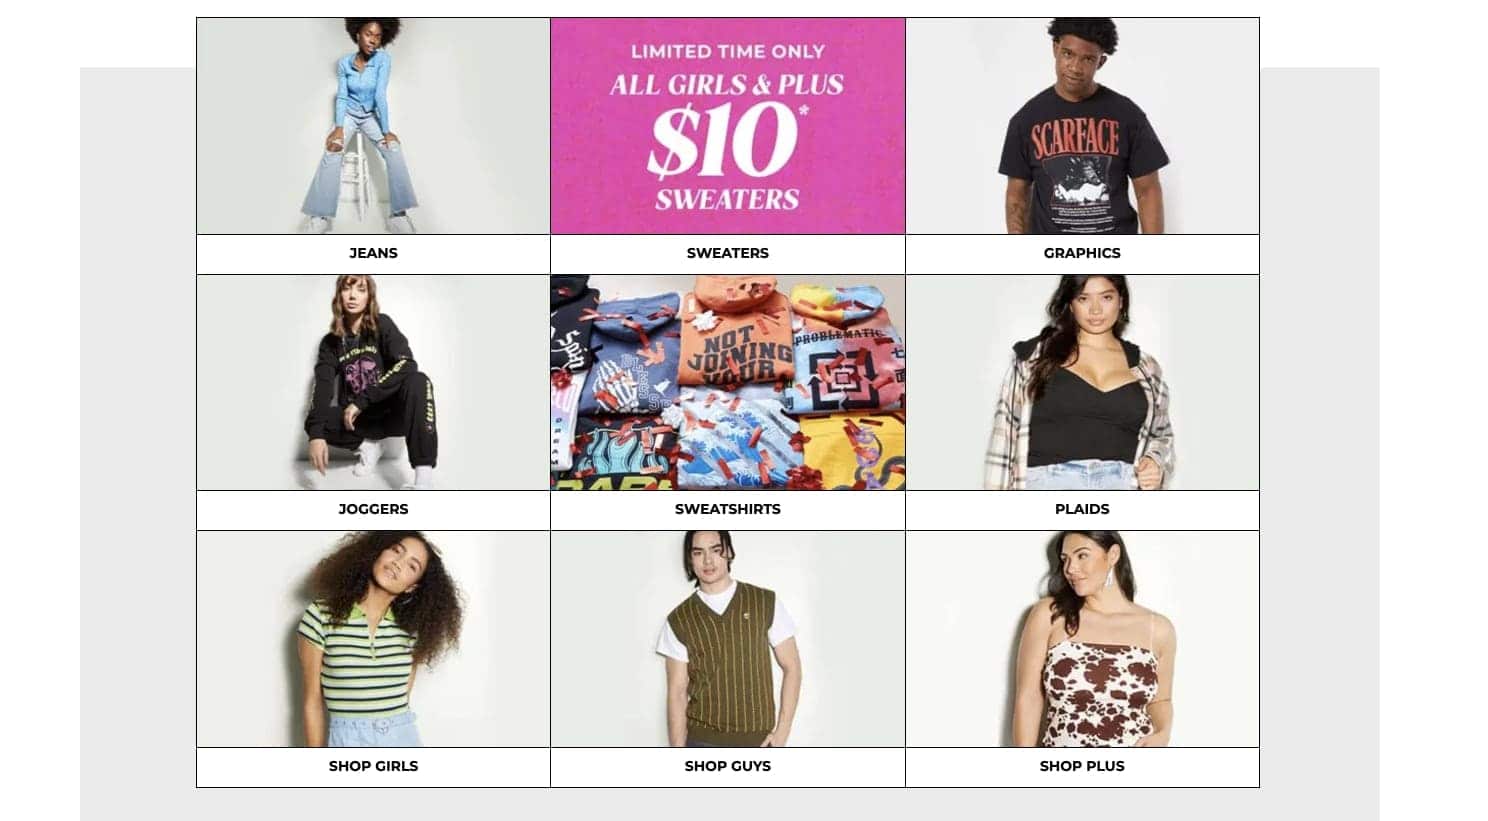 Product categories on Rue21.com